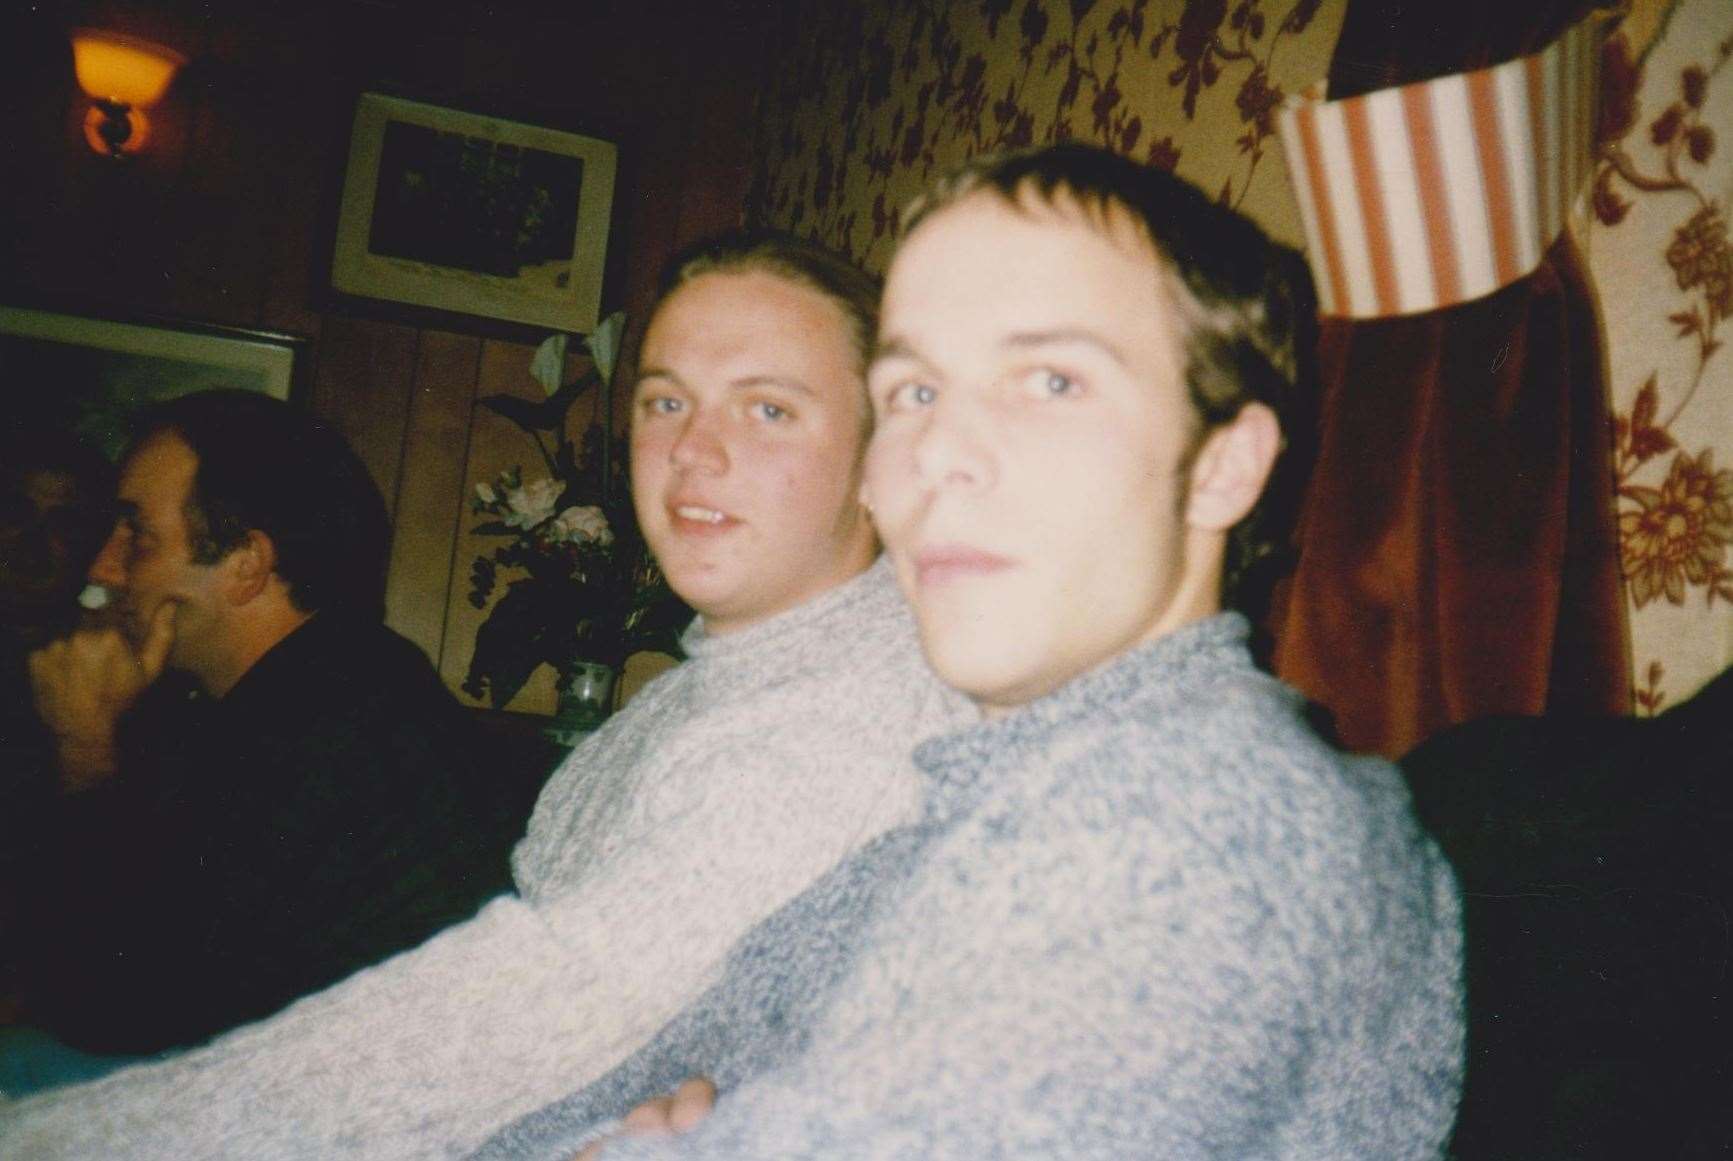 Ben Akers, left, with Steve Yates